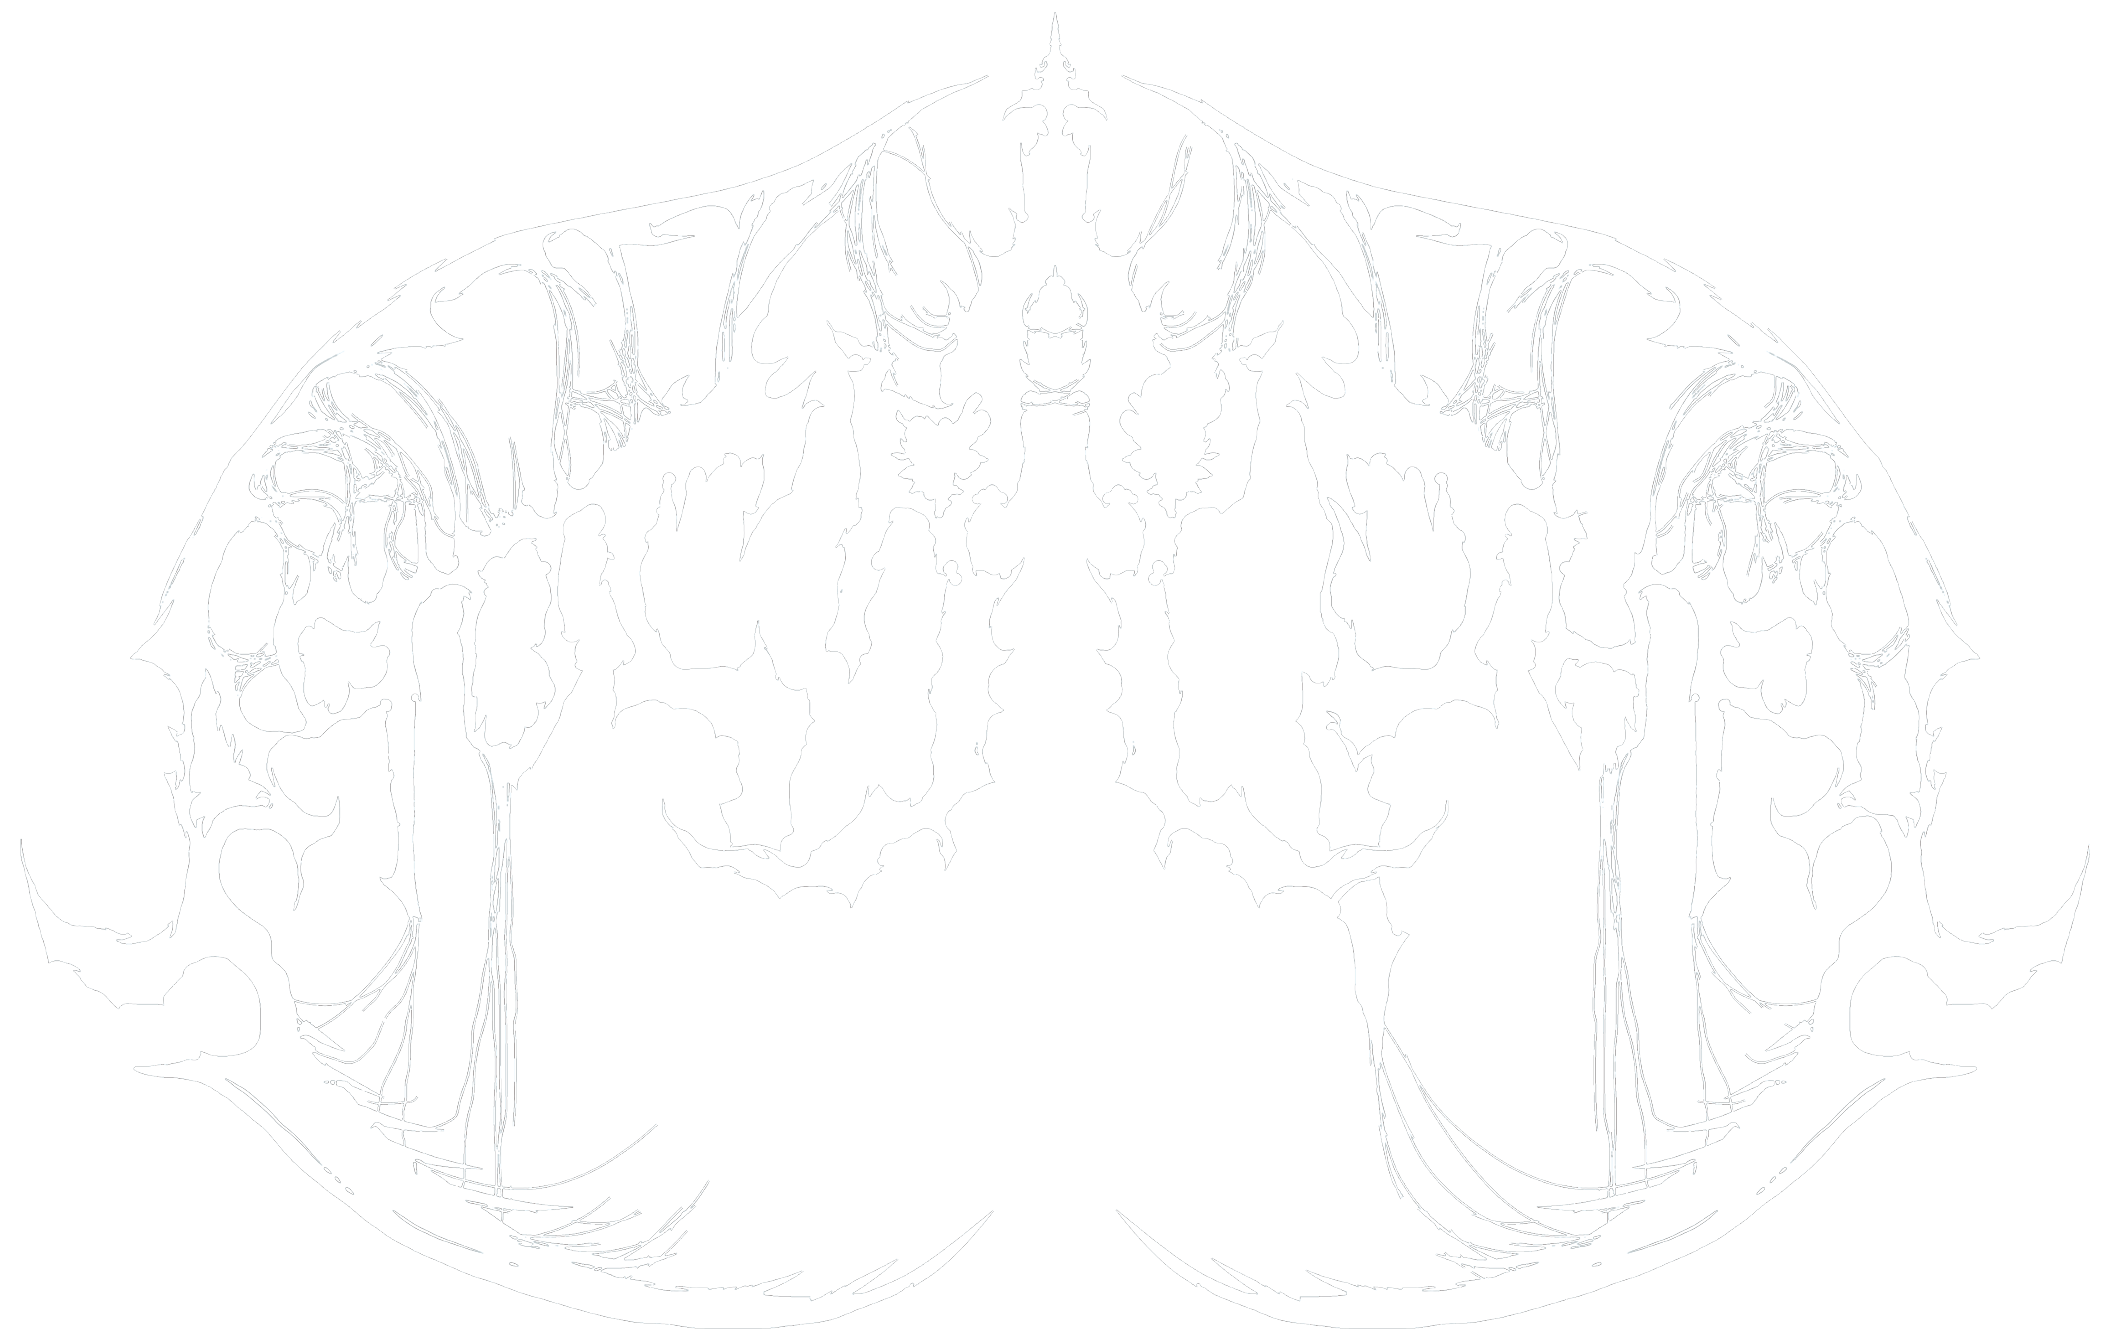 Infected logo